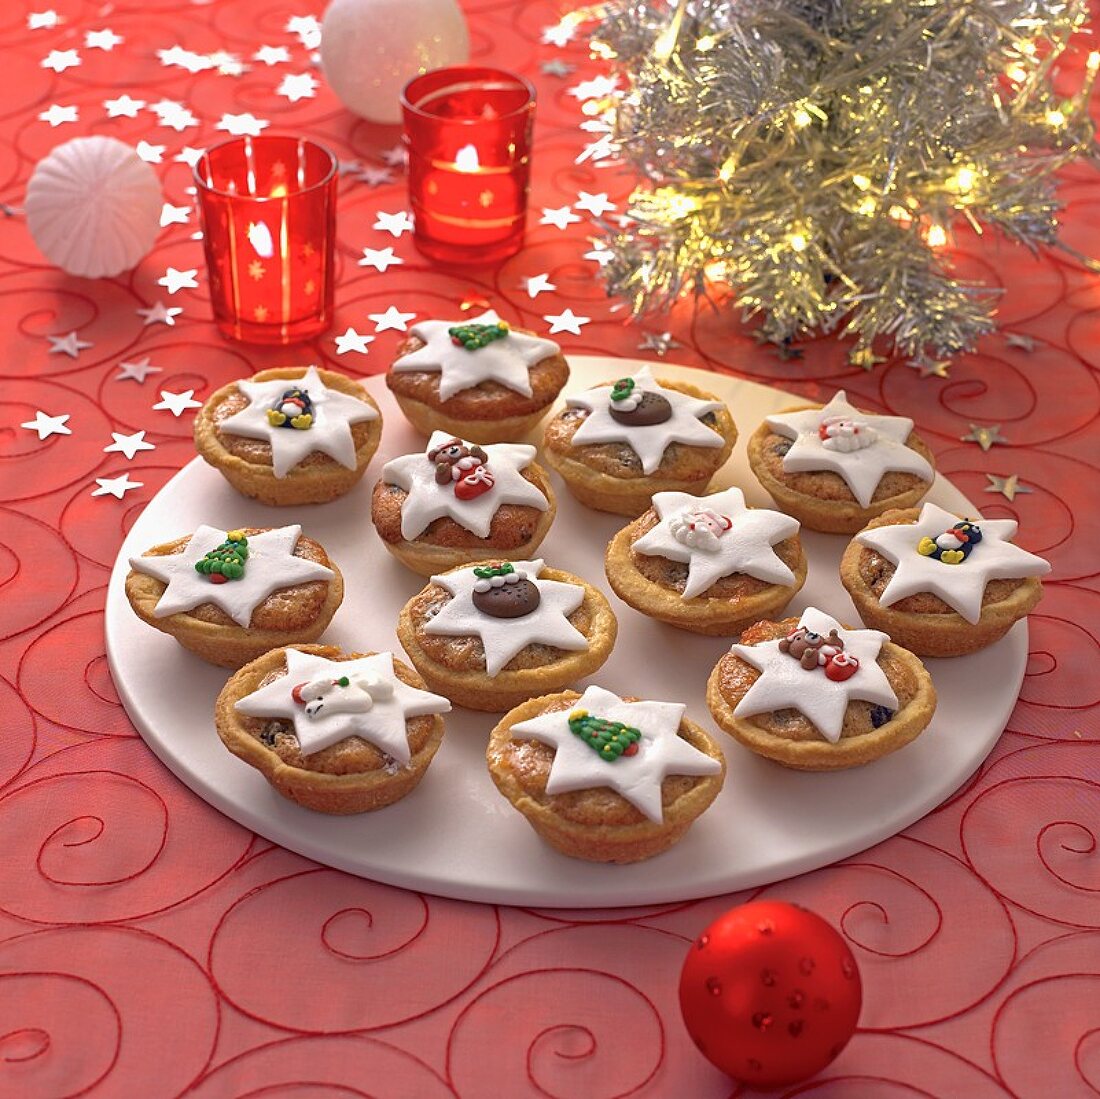 Mince pies (British Christmas speciality)